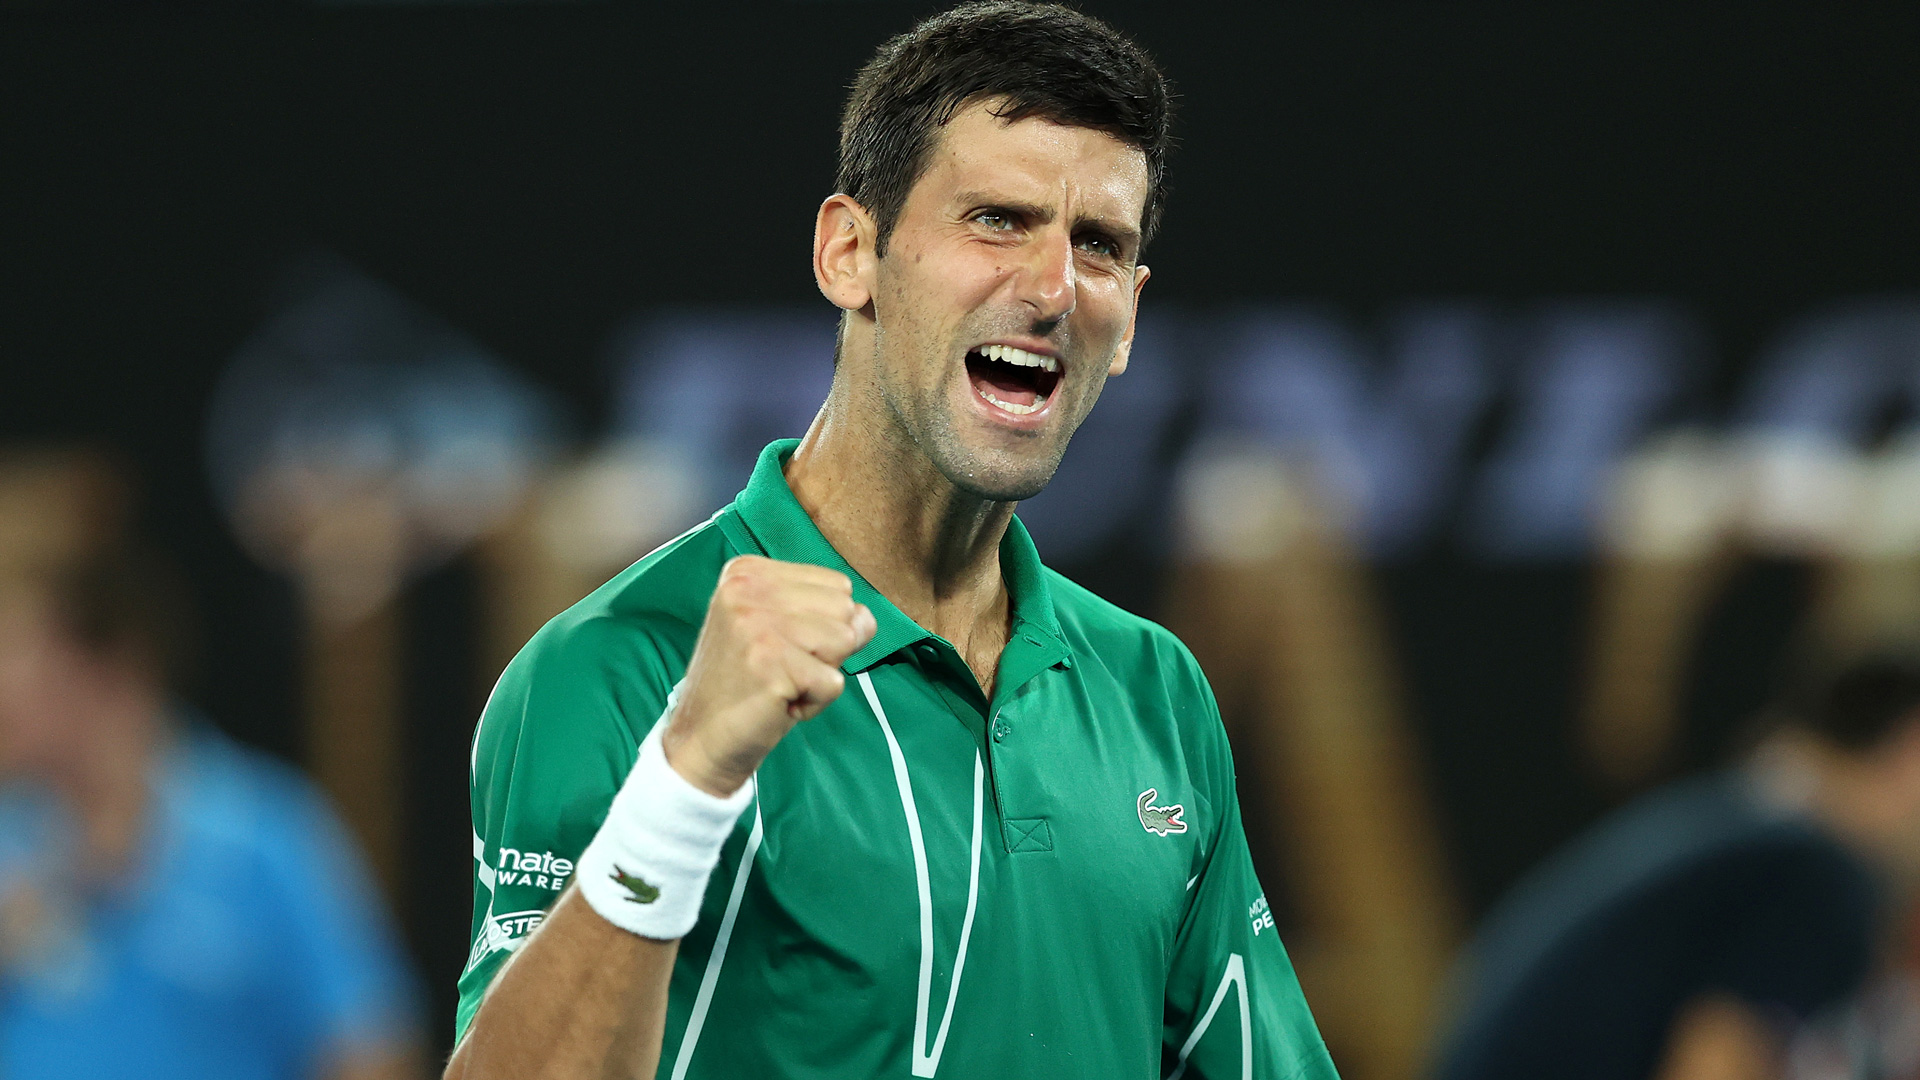 Novak Djokovic, the man behind the player : Questions and answers